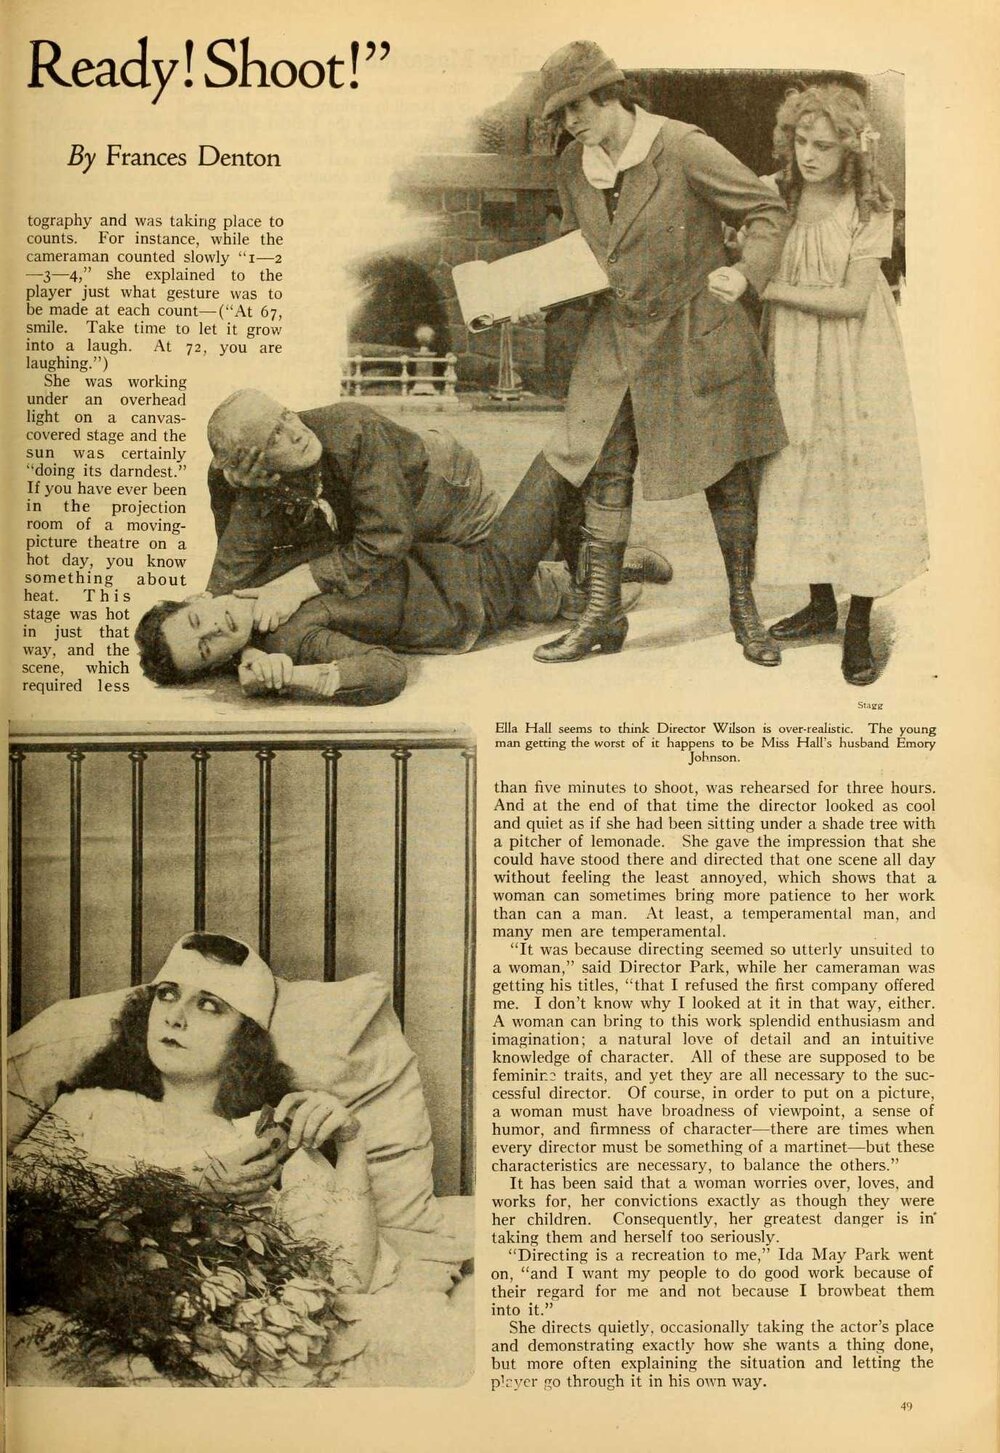  Elsie Jane Wilson interview in Photoplay (1917), courtesy of the Media History Digital Library and The Museum of Modern Art Library, New York. 